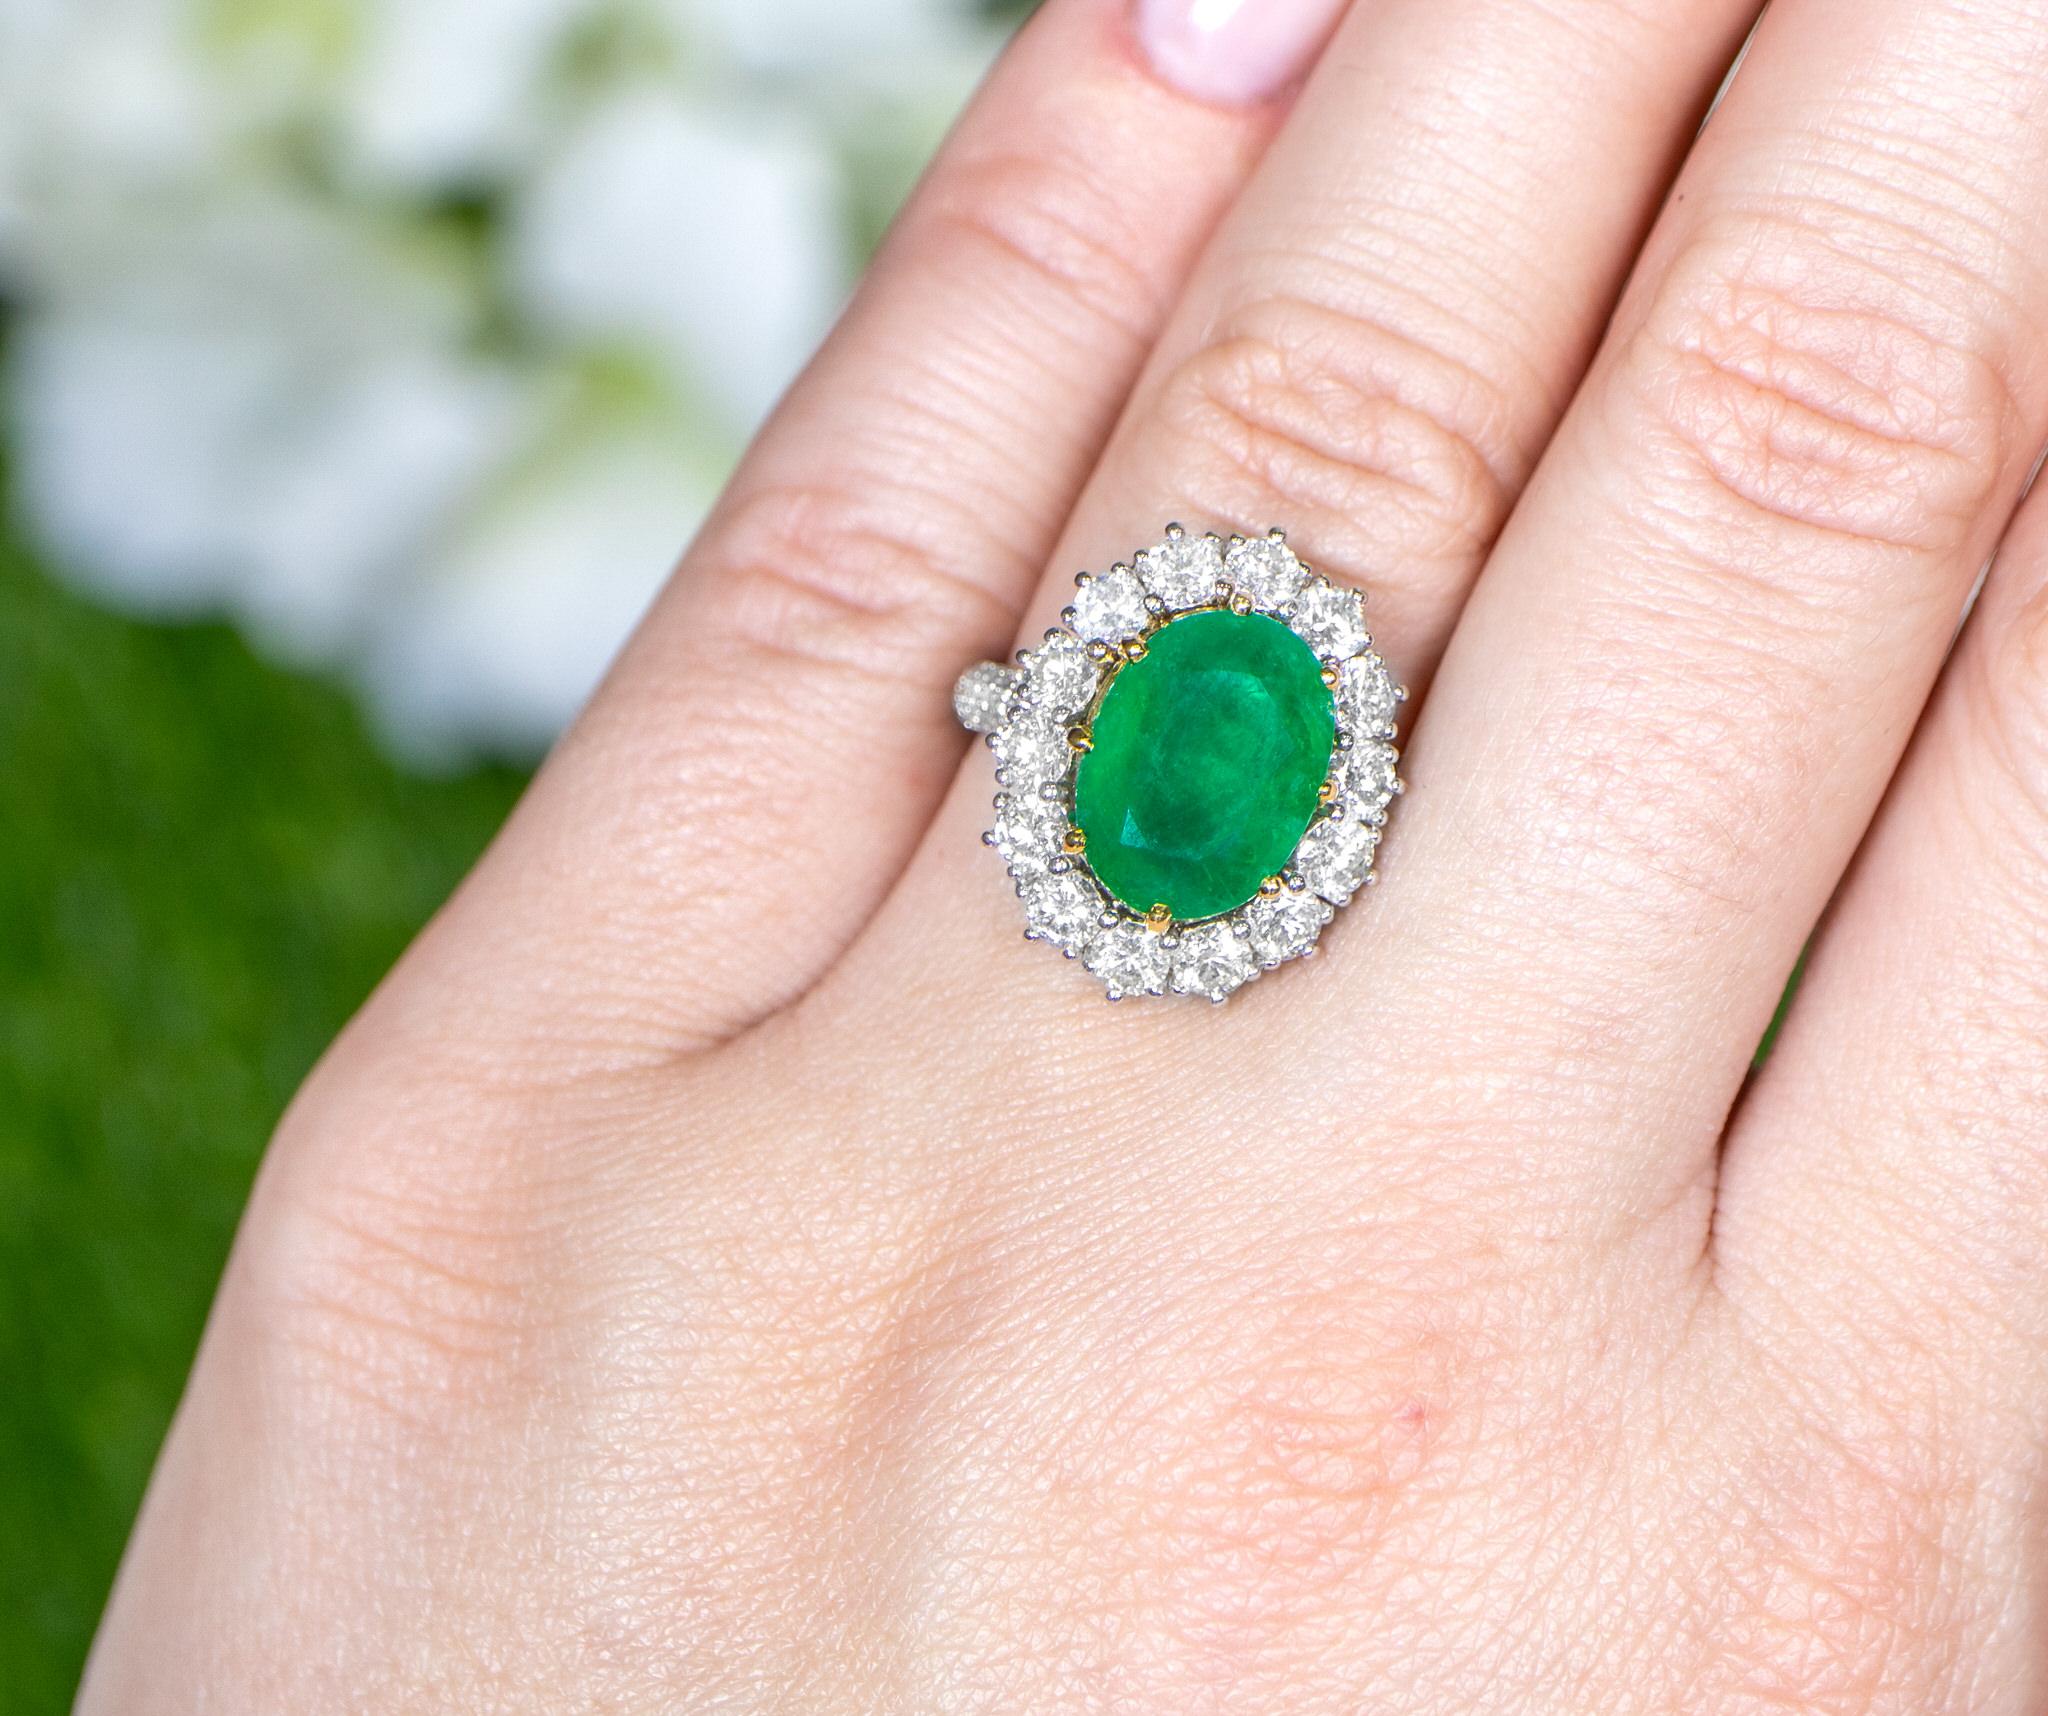 Oval Emerald Ring With Diamond Halo Setting 6.24 Carats 18K Gold For Sale 1